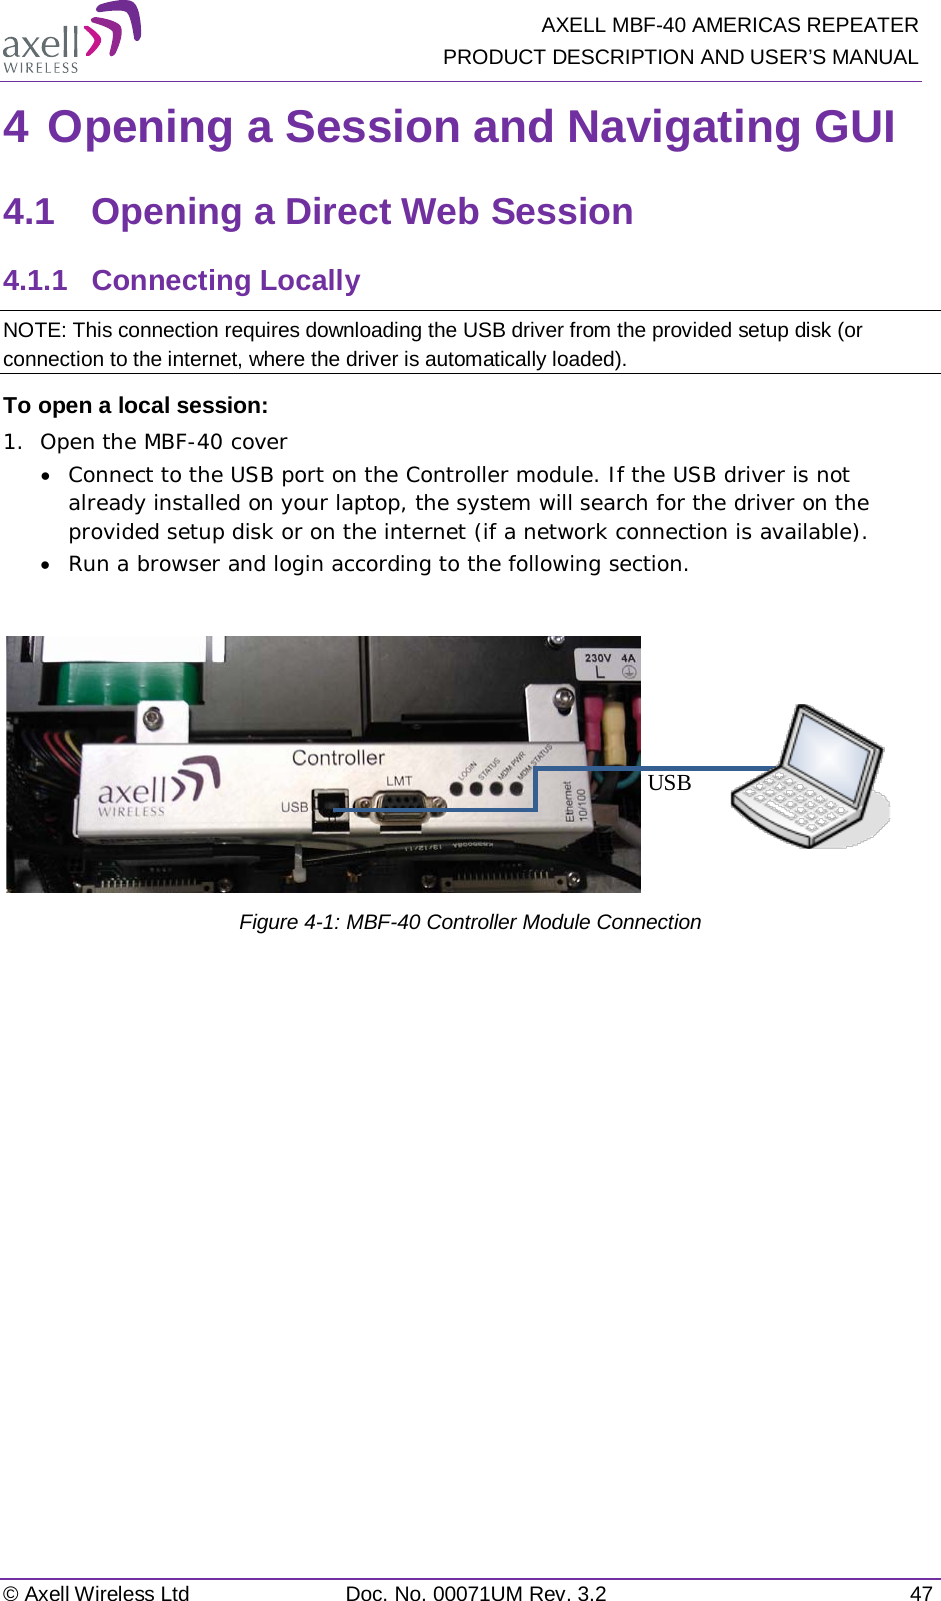   AXELL MBF-40 AMERICAS REPEATER PRODUCT DESCRIPTION AND USER’S MANUAL © Axell Wireless Ltd Doc. No. 00071UM Rev. 3.2 47 4 Opening a Session and Navigating GUI 4.1  Opening a Direct Web Session 4.1.1  Connecting Locally NOTE: This connection requires downloading the USB driver from the provided setup disk (or connection to the internet, where the driver is automatically loaded). To open a local session: 1.  Open the MBF-40 cover • Connect to the USB port on the Controller module. If the USB driver is not already installed on your laptop, the system will search for the driver on the provided setup disk or on the internet (if a network connection is available). • Run a browser and login according to the following section.   Figure  4-1: MBF-40 Controller Module Connection USB  